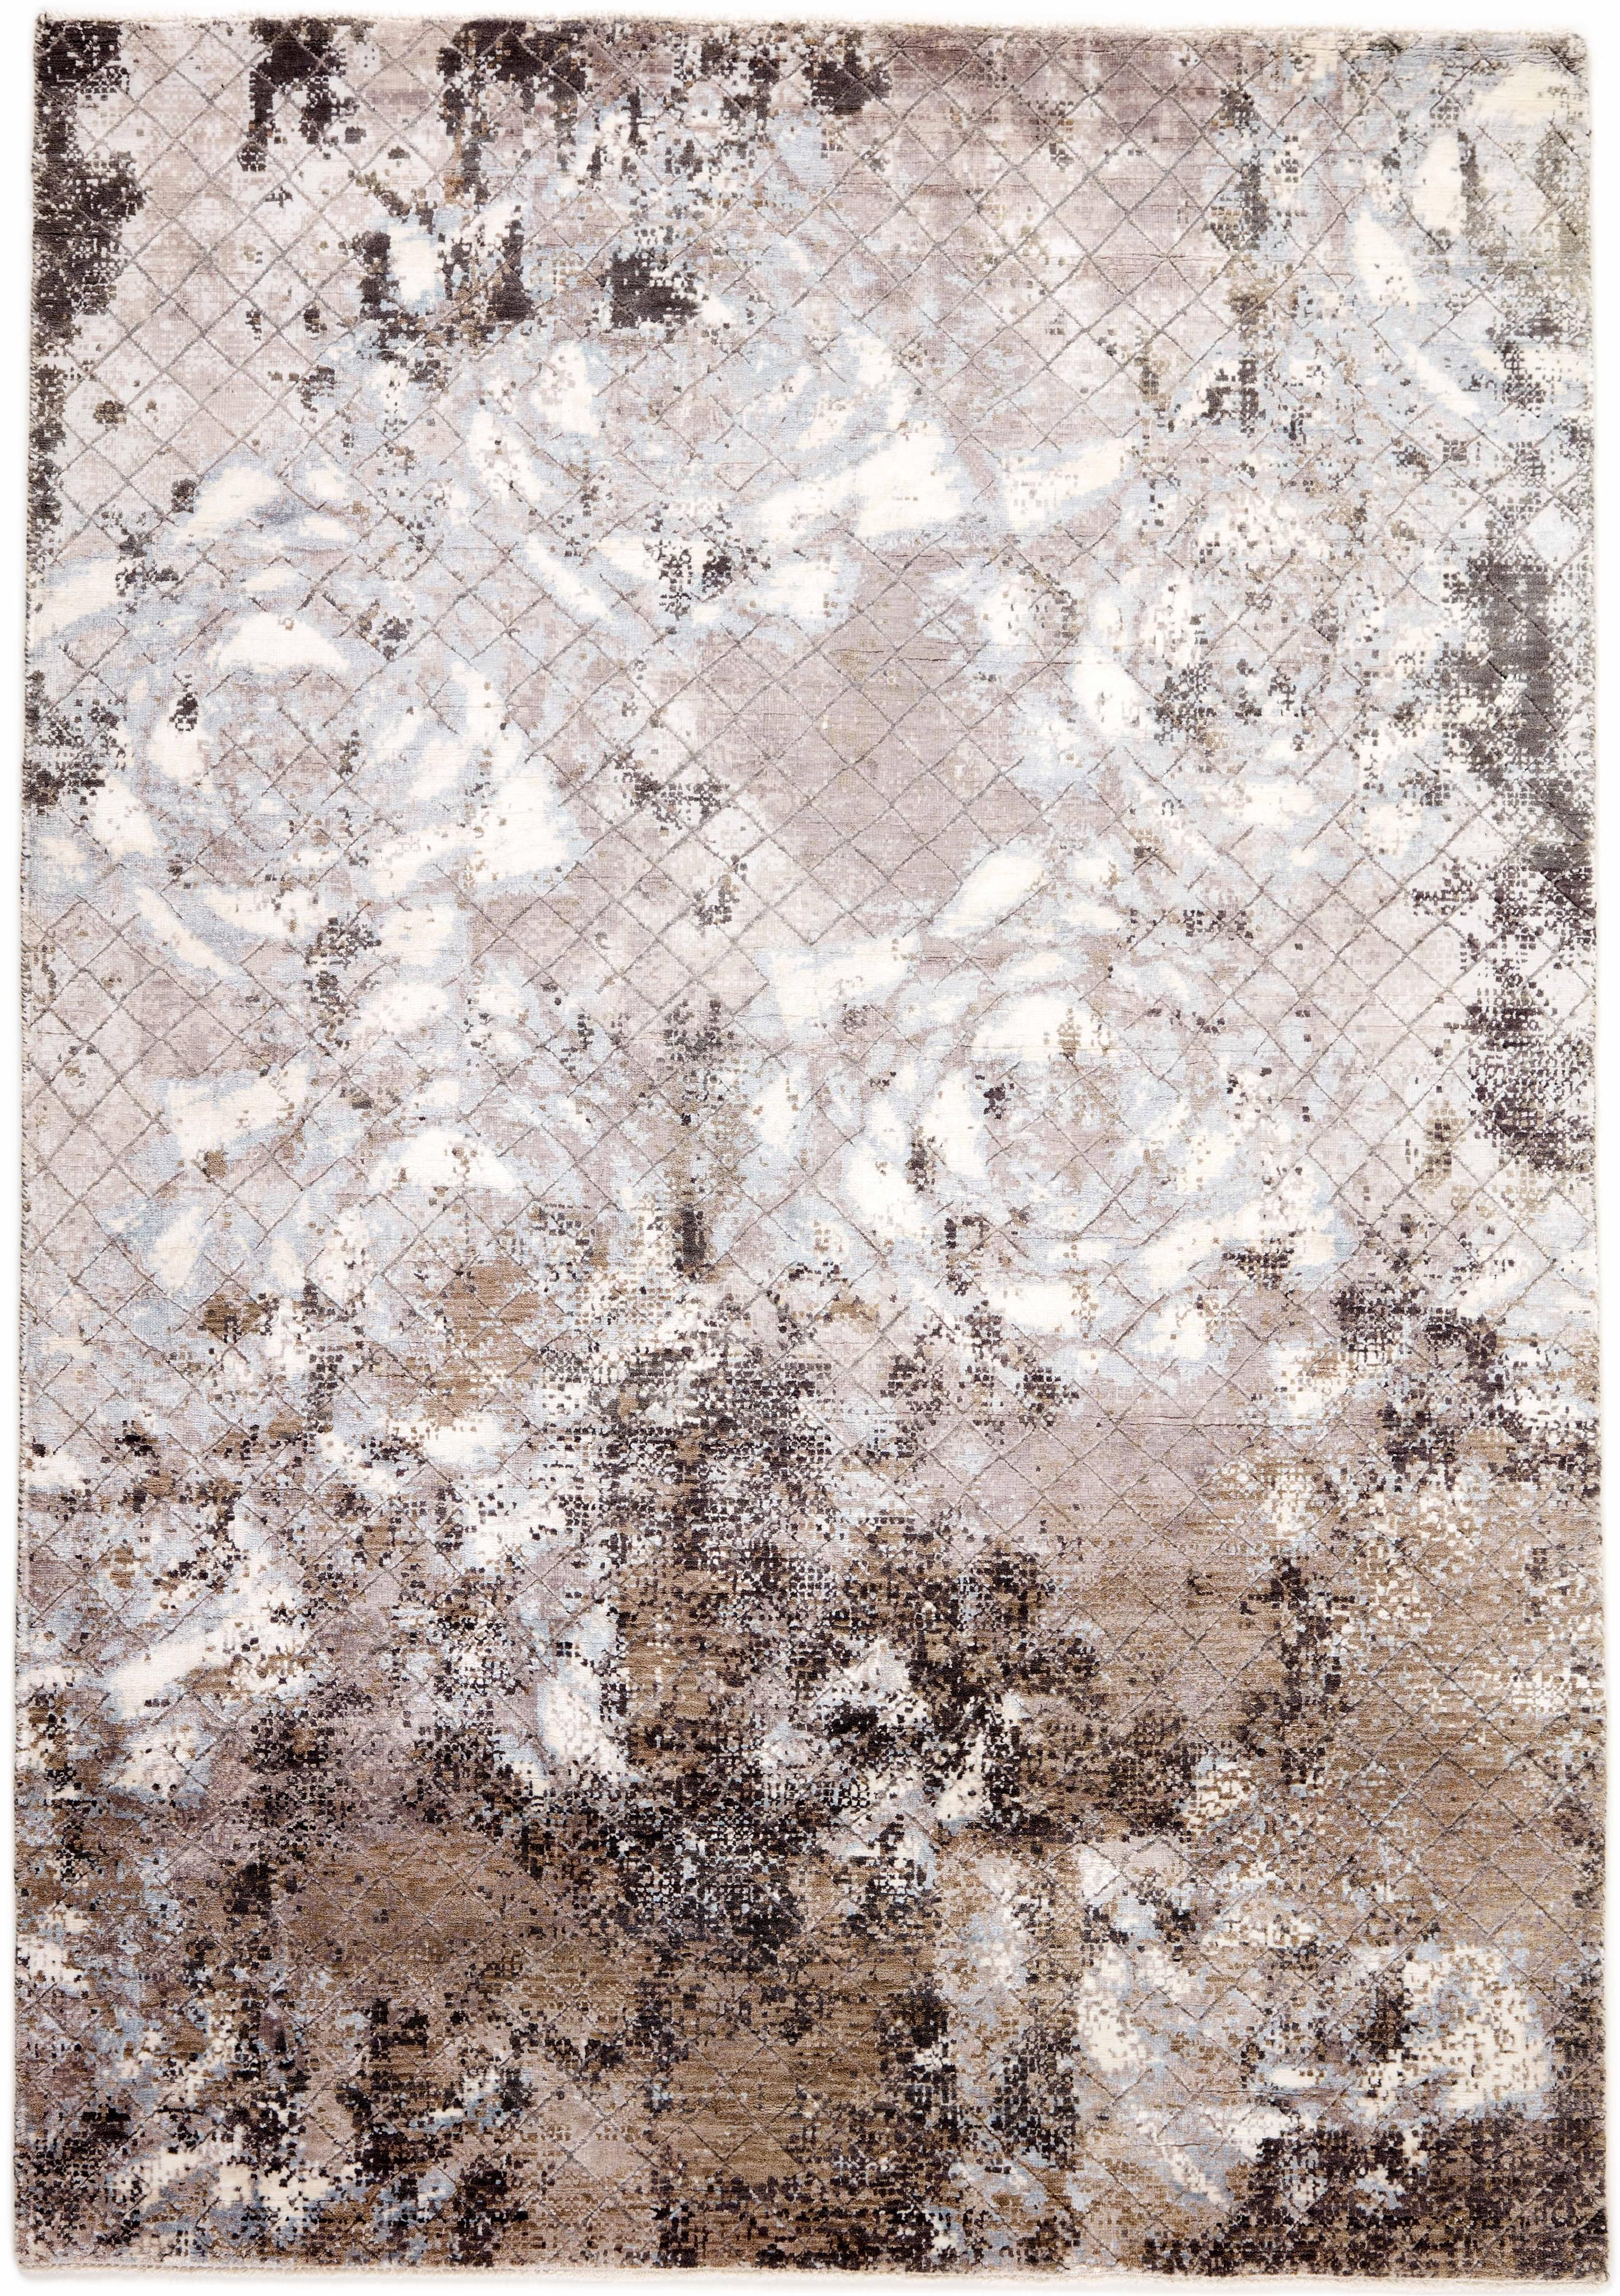 Large area rug with abstract design in grey, beige and red